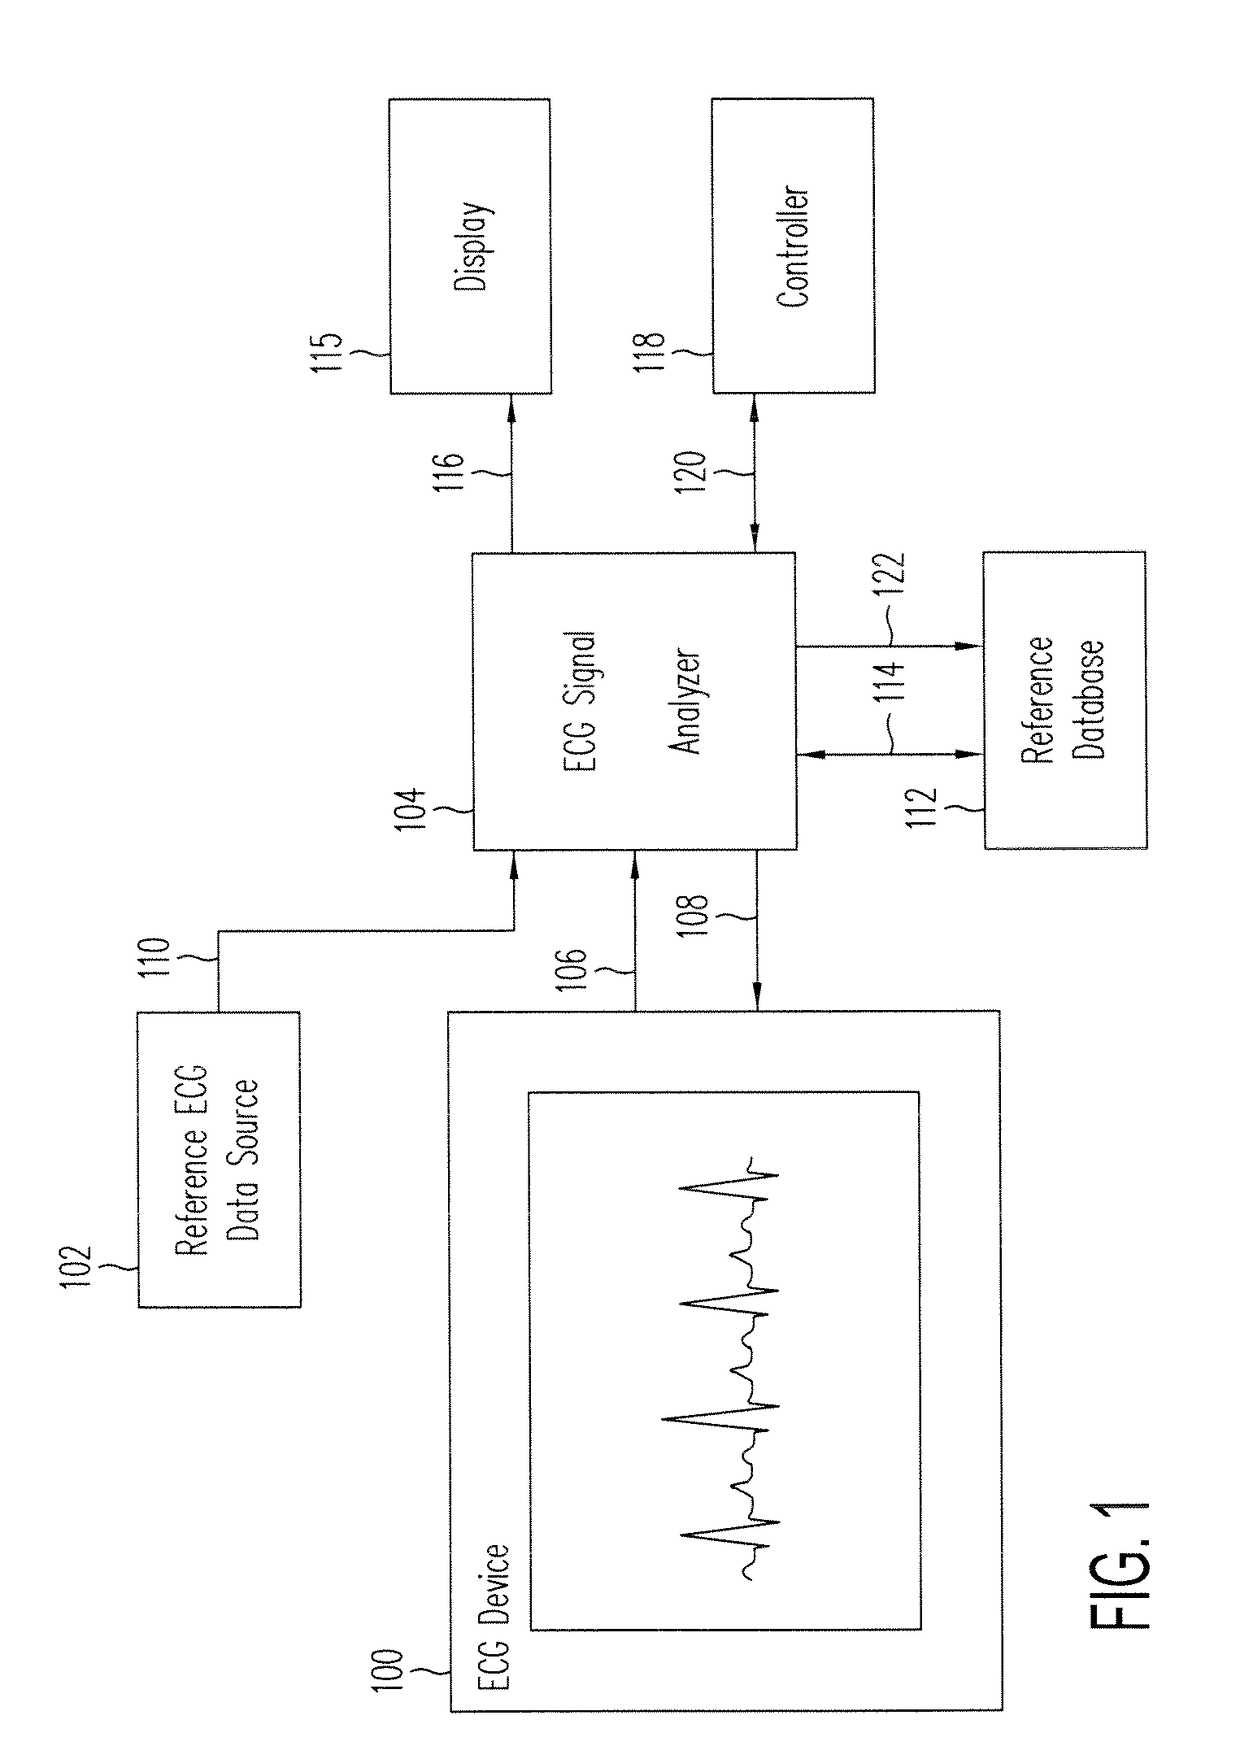 Methods and systems for disease analysis based on transformations of diagnostic signals